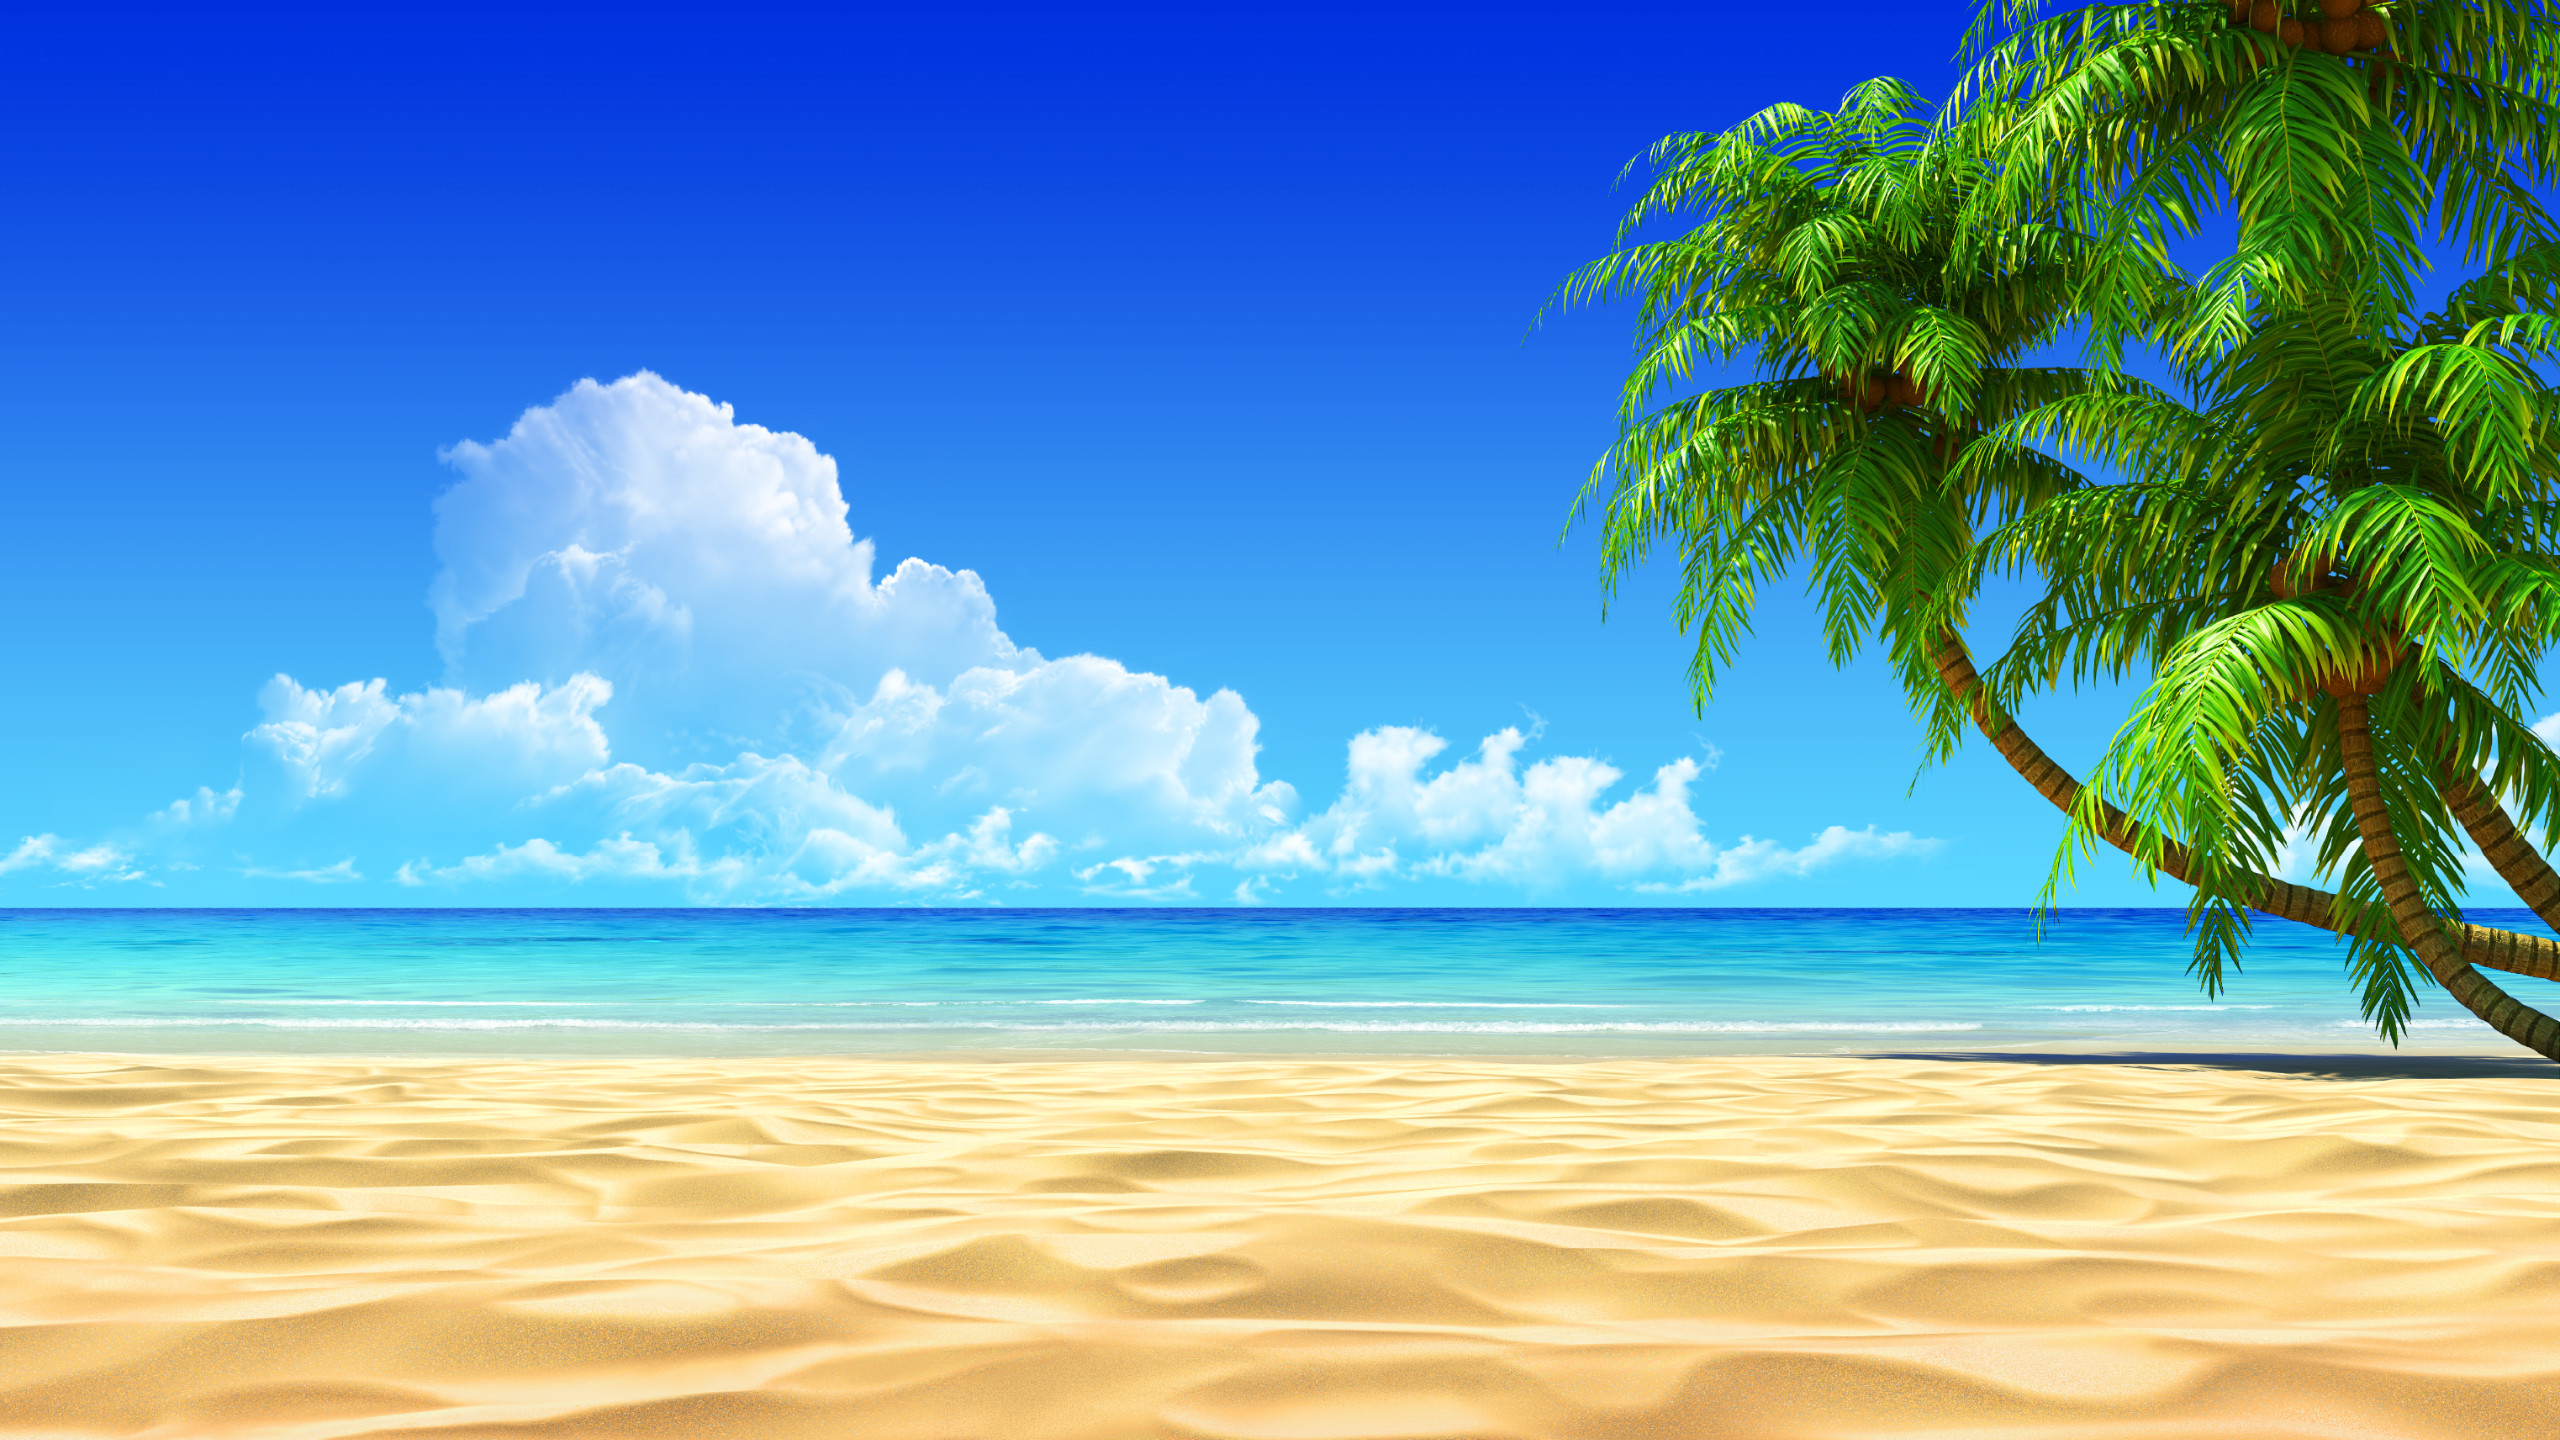 2560x1440 Image for Tropical Beaches With Palm Trees Wallpapers Desktop Background